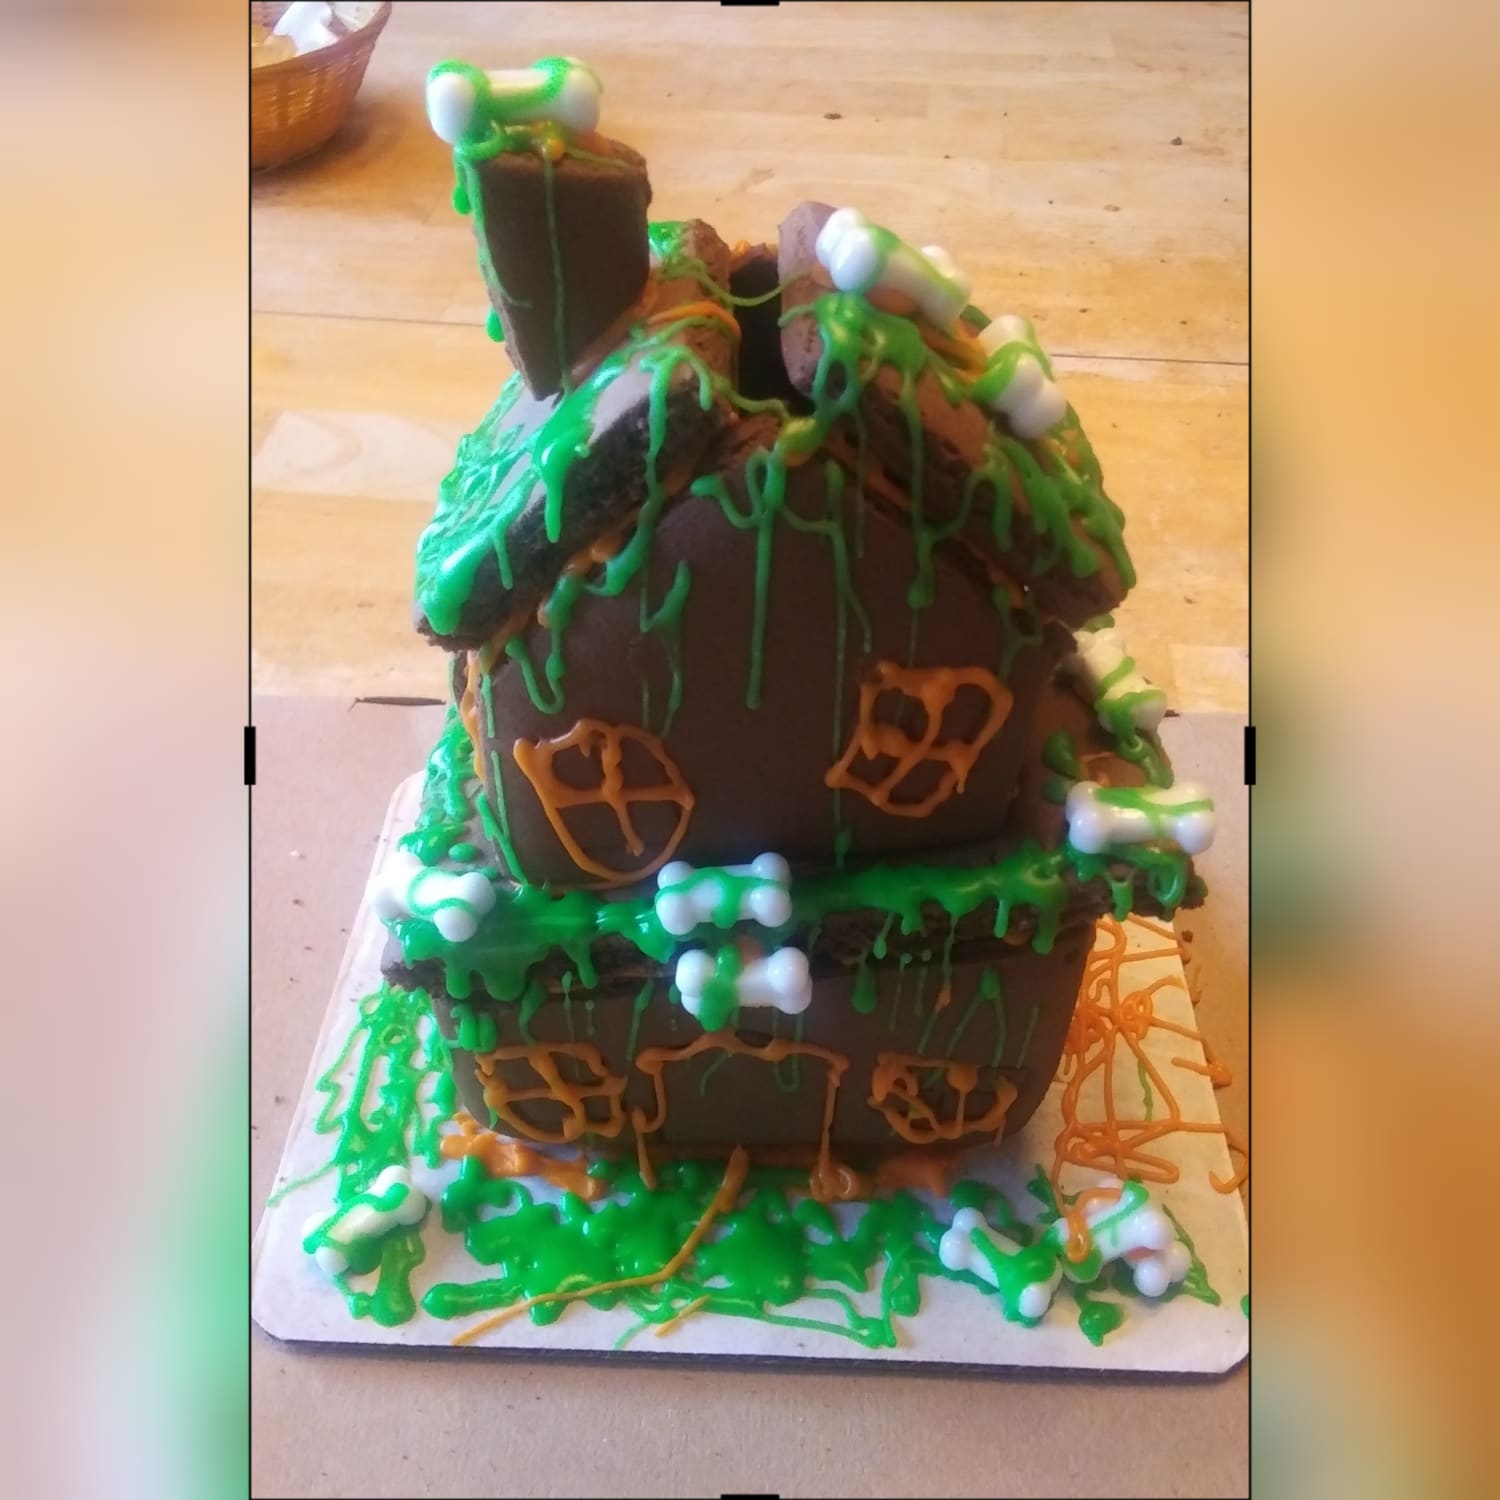 My 5yo w/ moderate autism & I built this Halloween gingerbread house for our weekend bonding activity. I built it, and he decorated with the "zombie slime". He's not very verbal, but said so many phrases during decorating. May not be perfect to some, but it is to him.